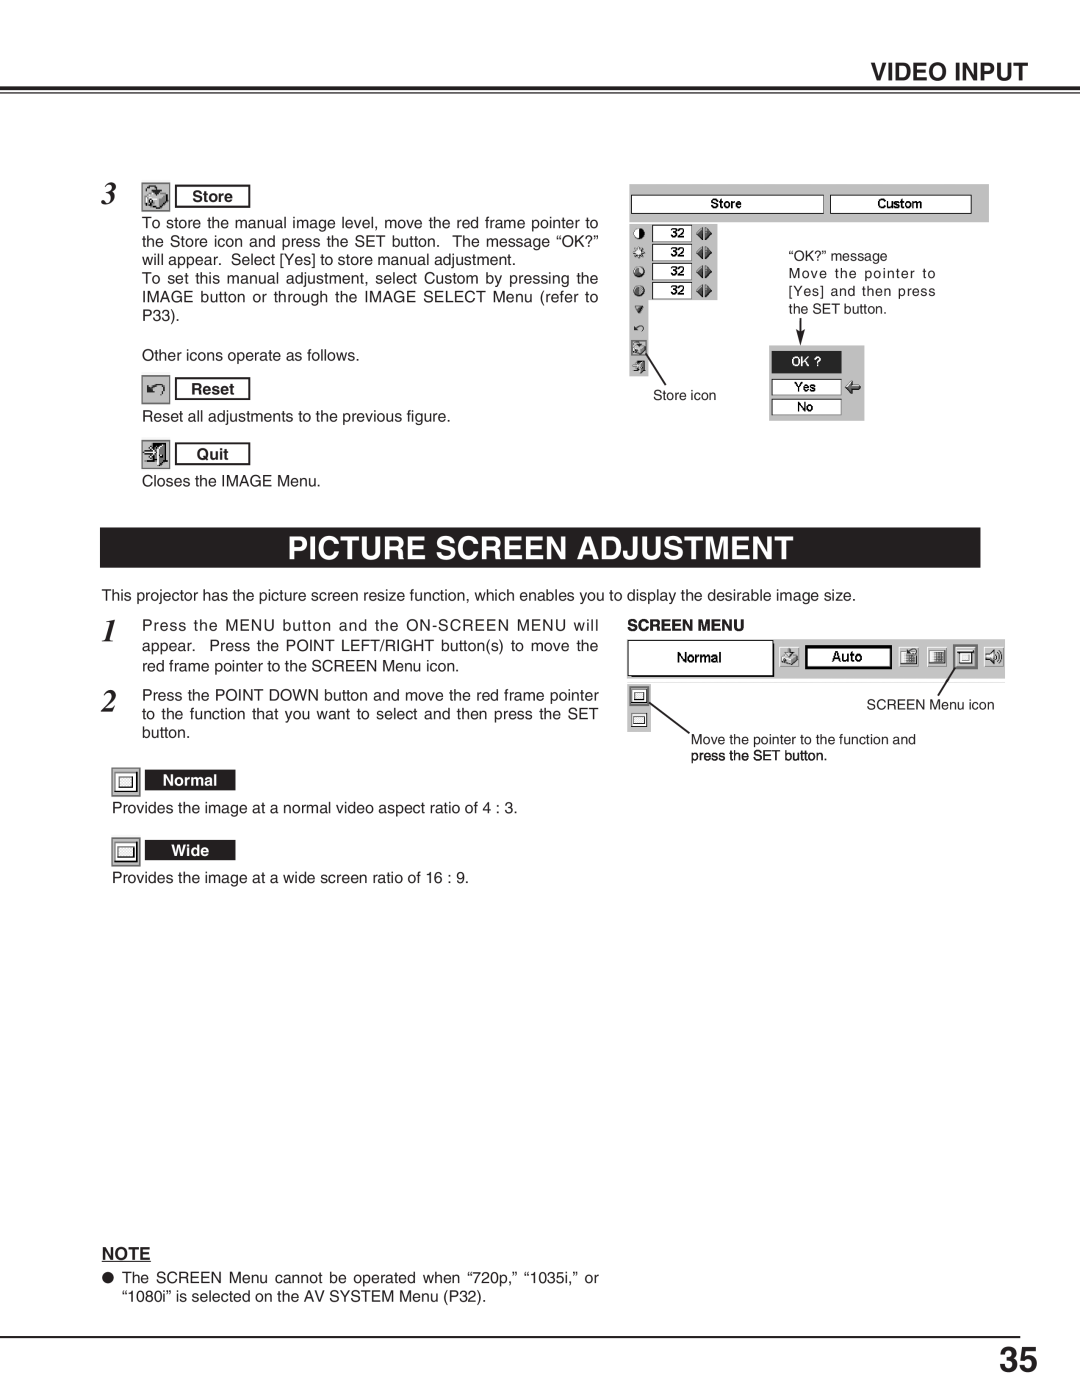 Canon LV-5200 owner manual Picture Screen Adjustment, Video Input, Store, Reset, Quit, Screen Menu 